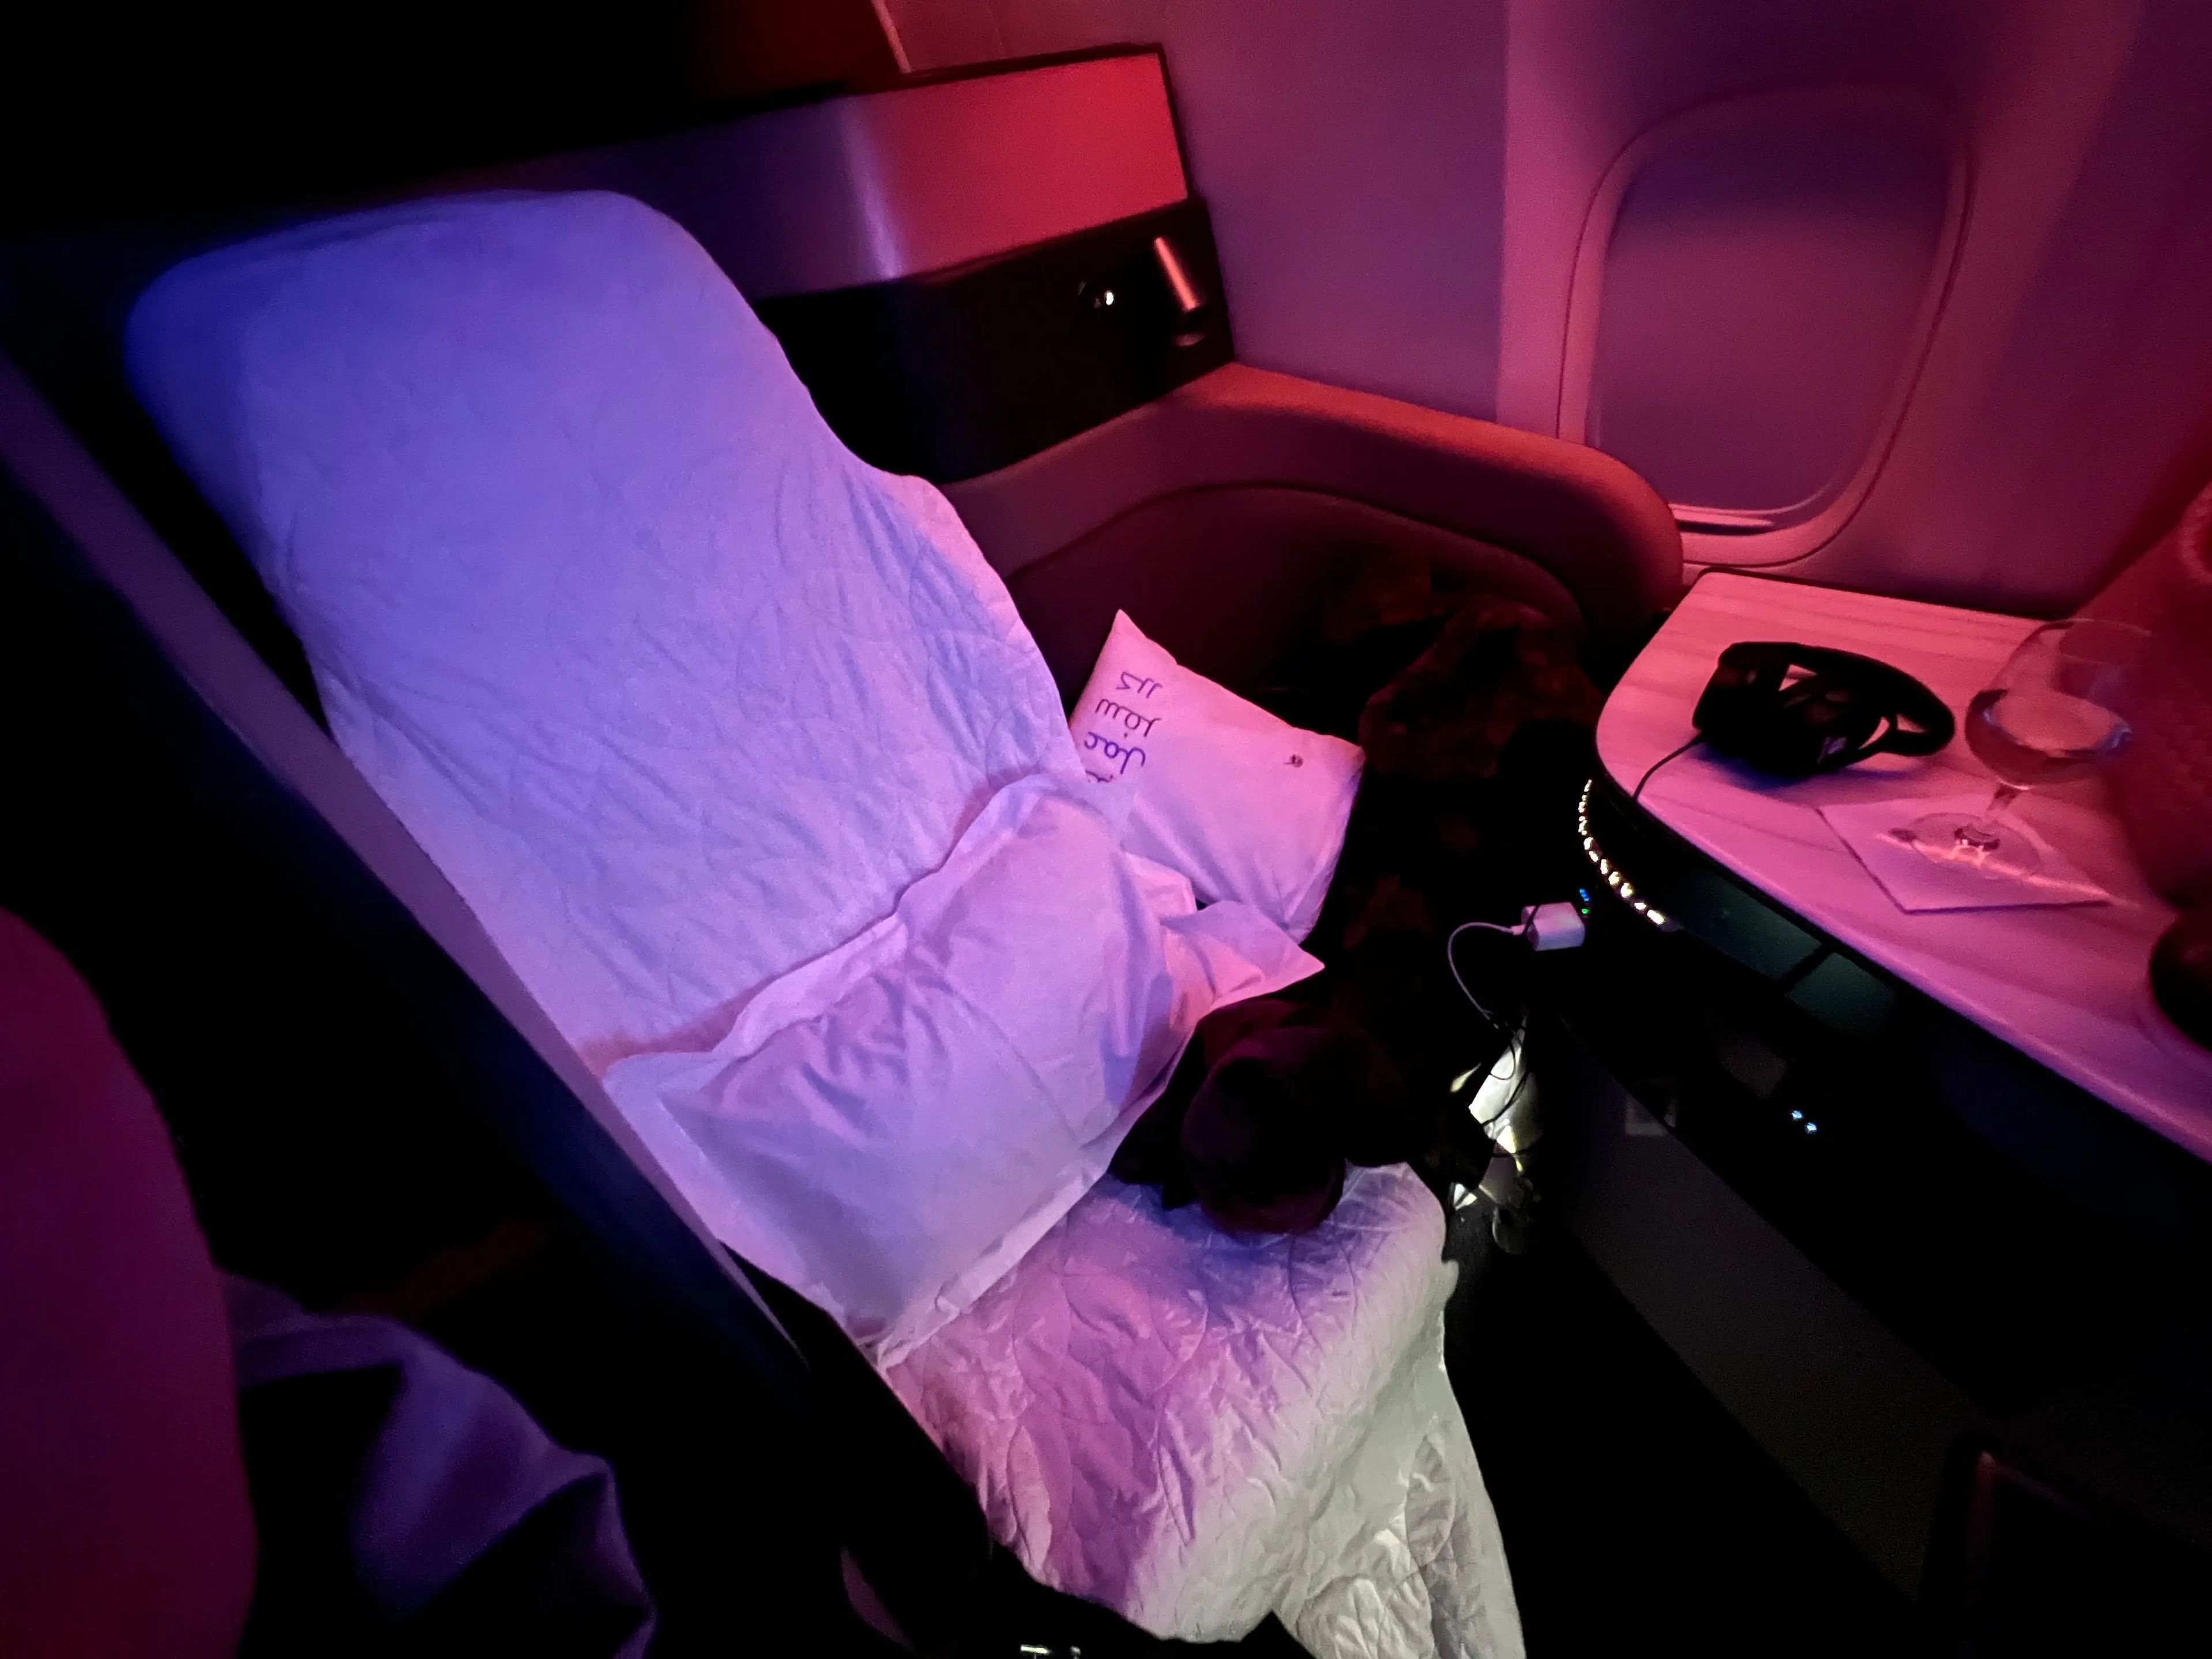 The seat was converted into a bed after takeoff.